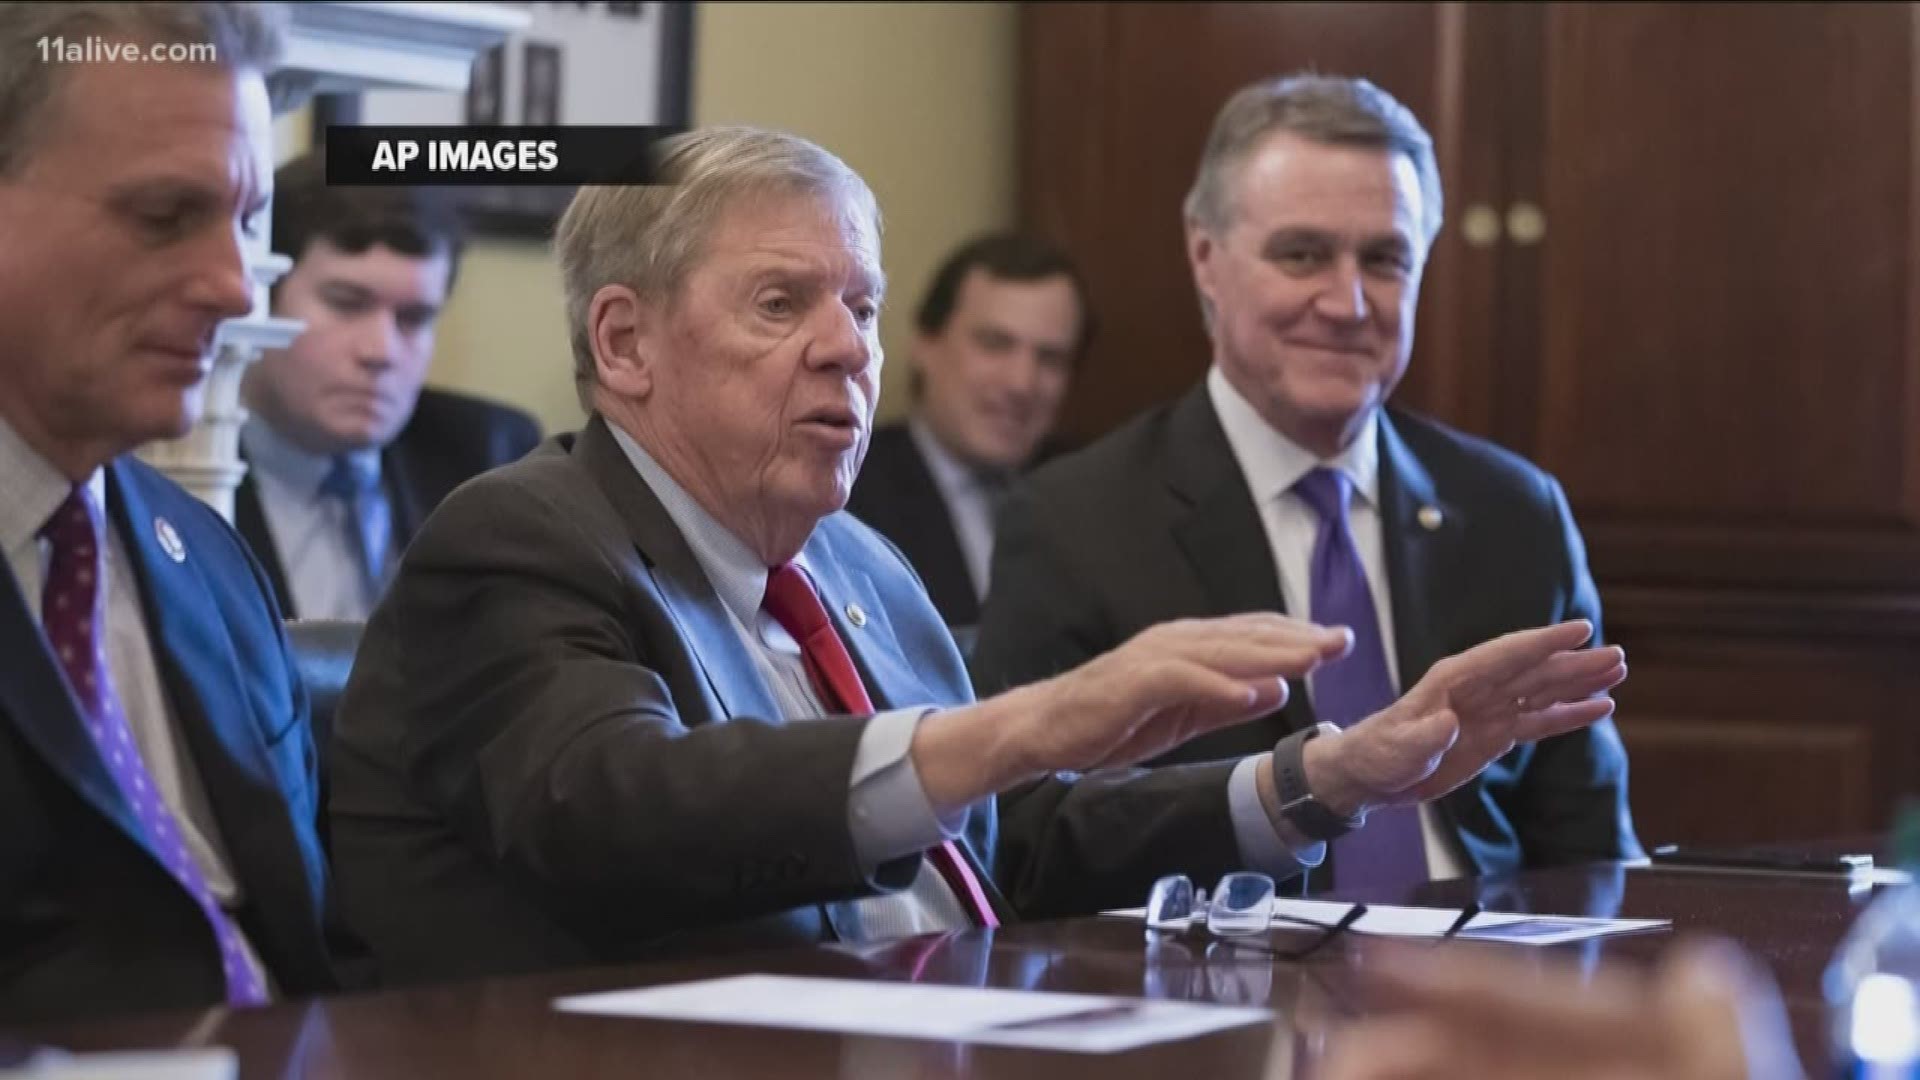 Isakson’s Senate term ends in 2022, and there will be three years left in the term when he vacates the seat in December.